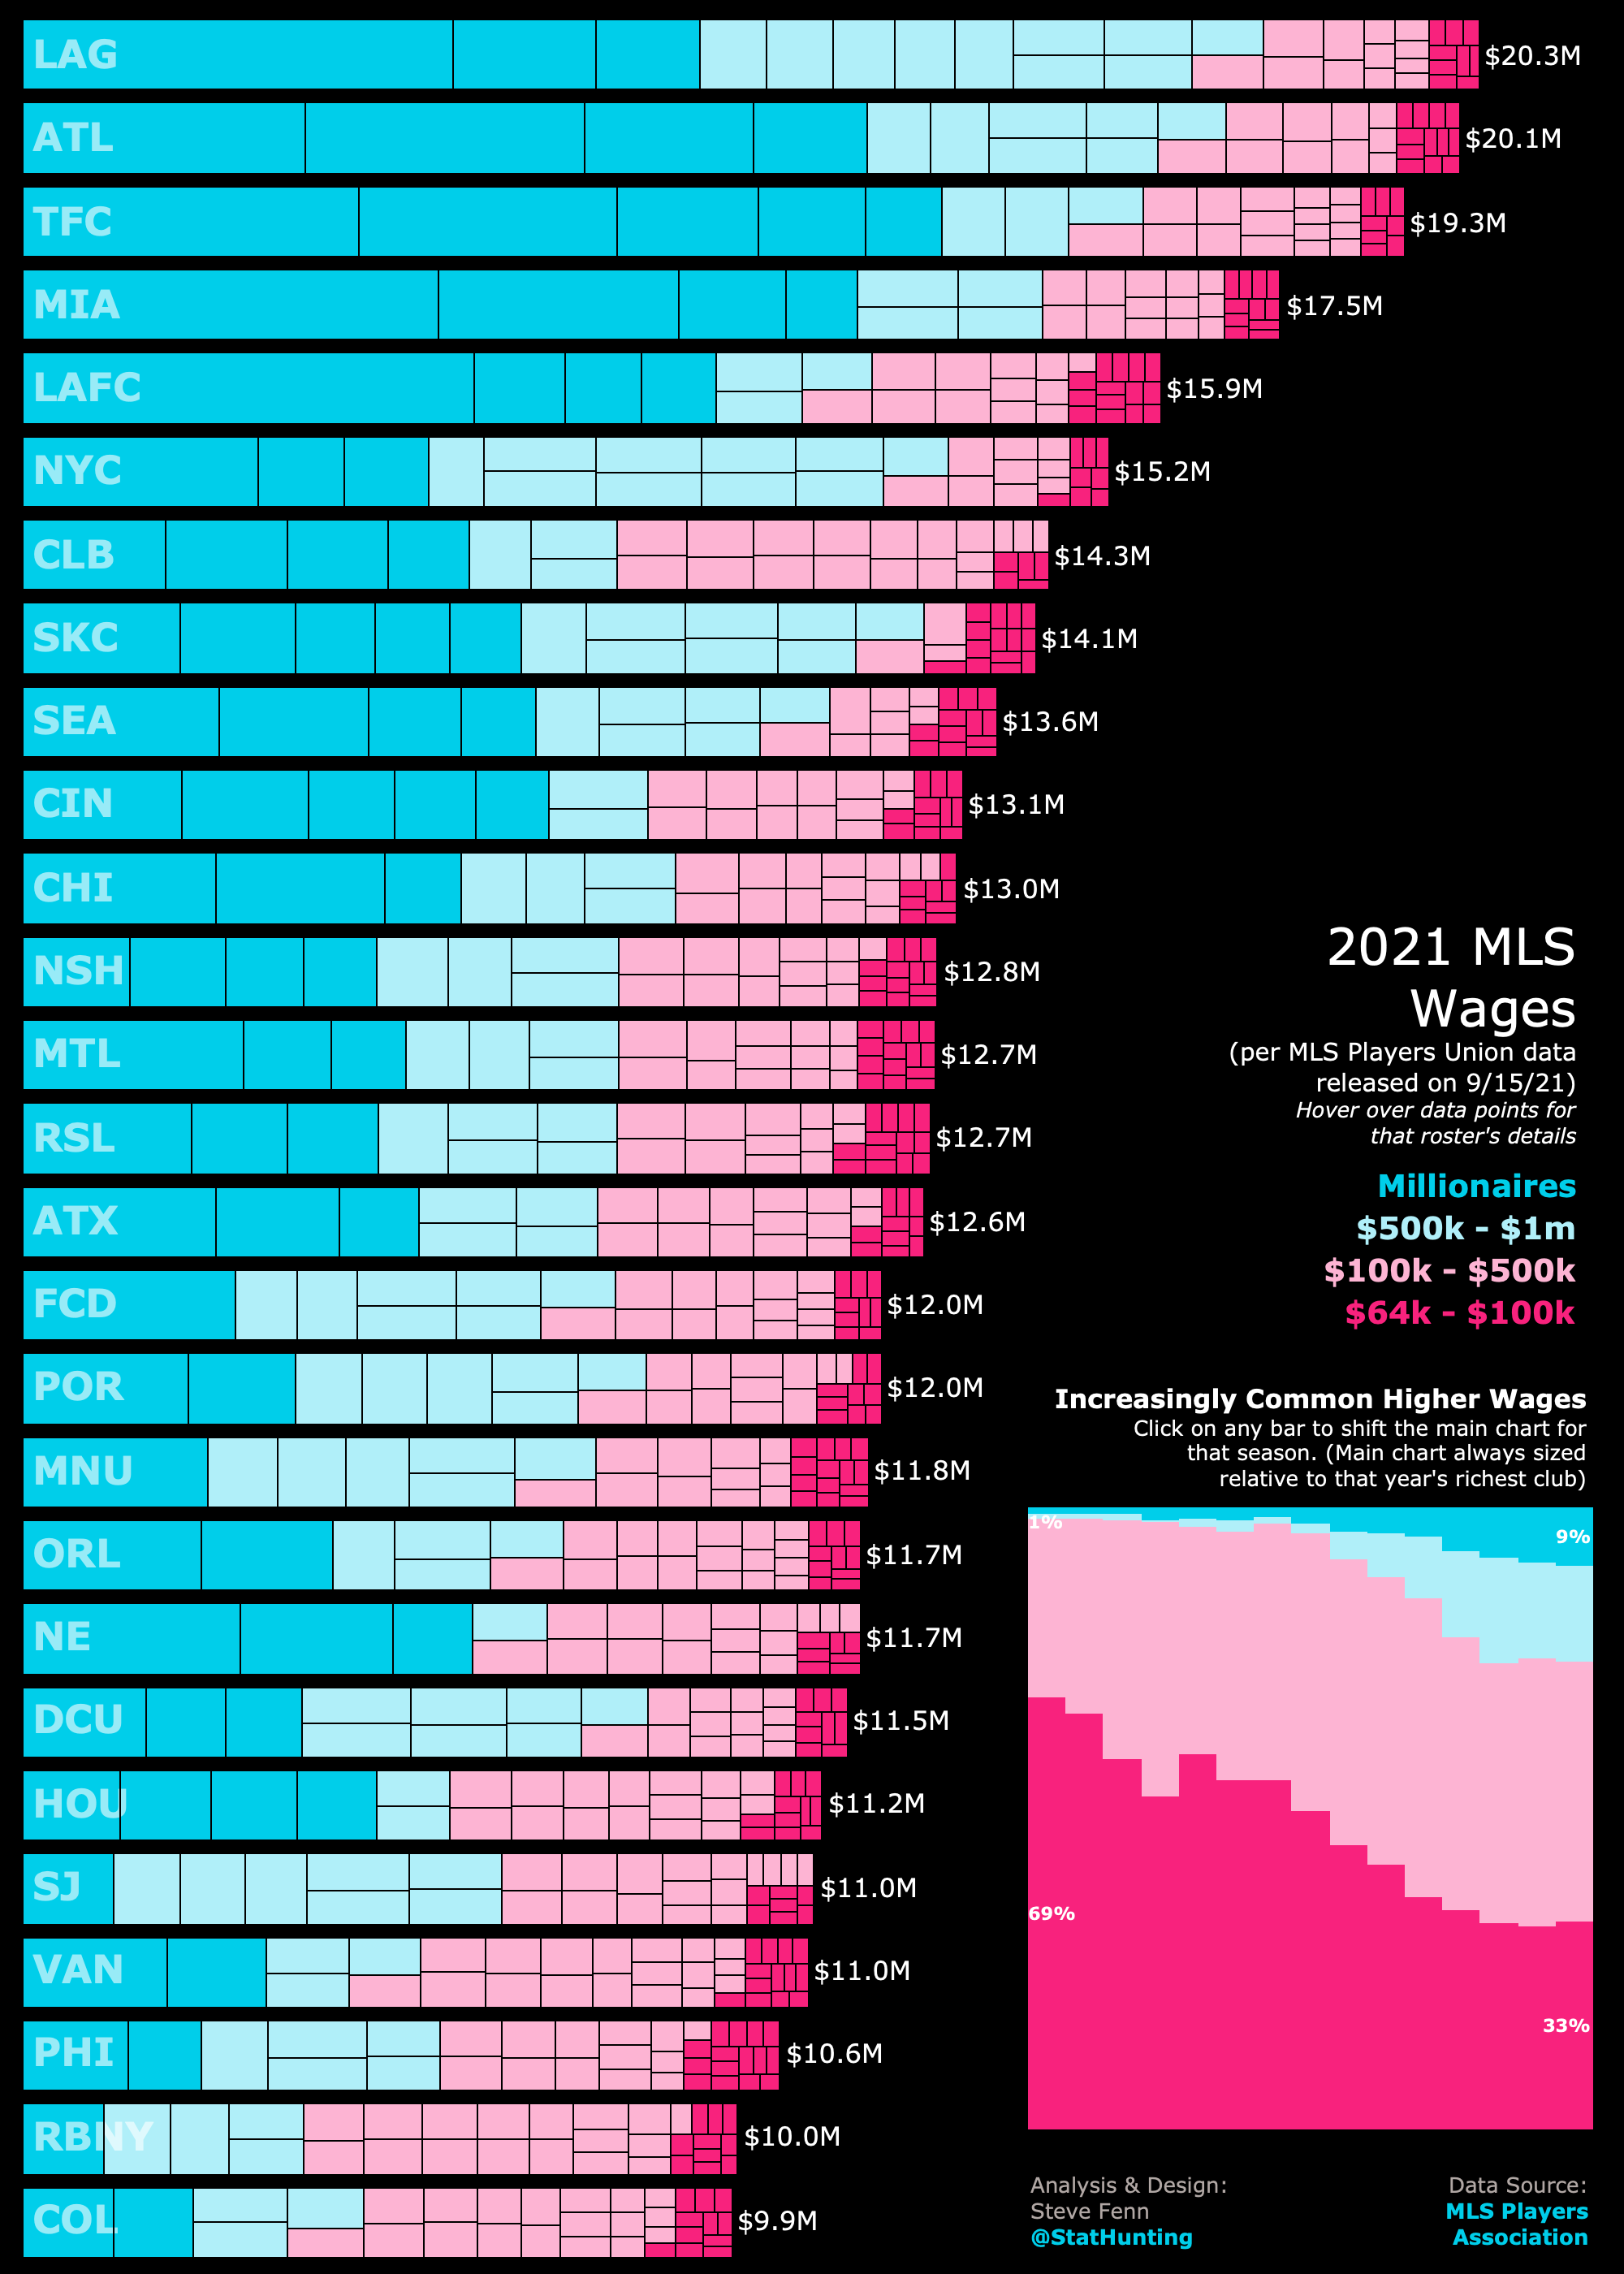 MLS Wages 2007 - Present